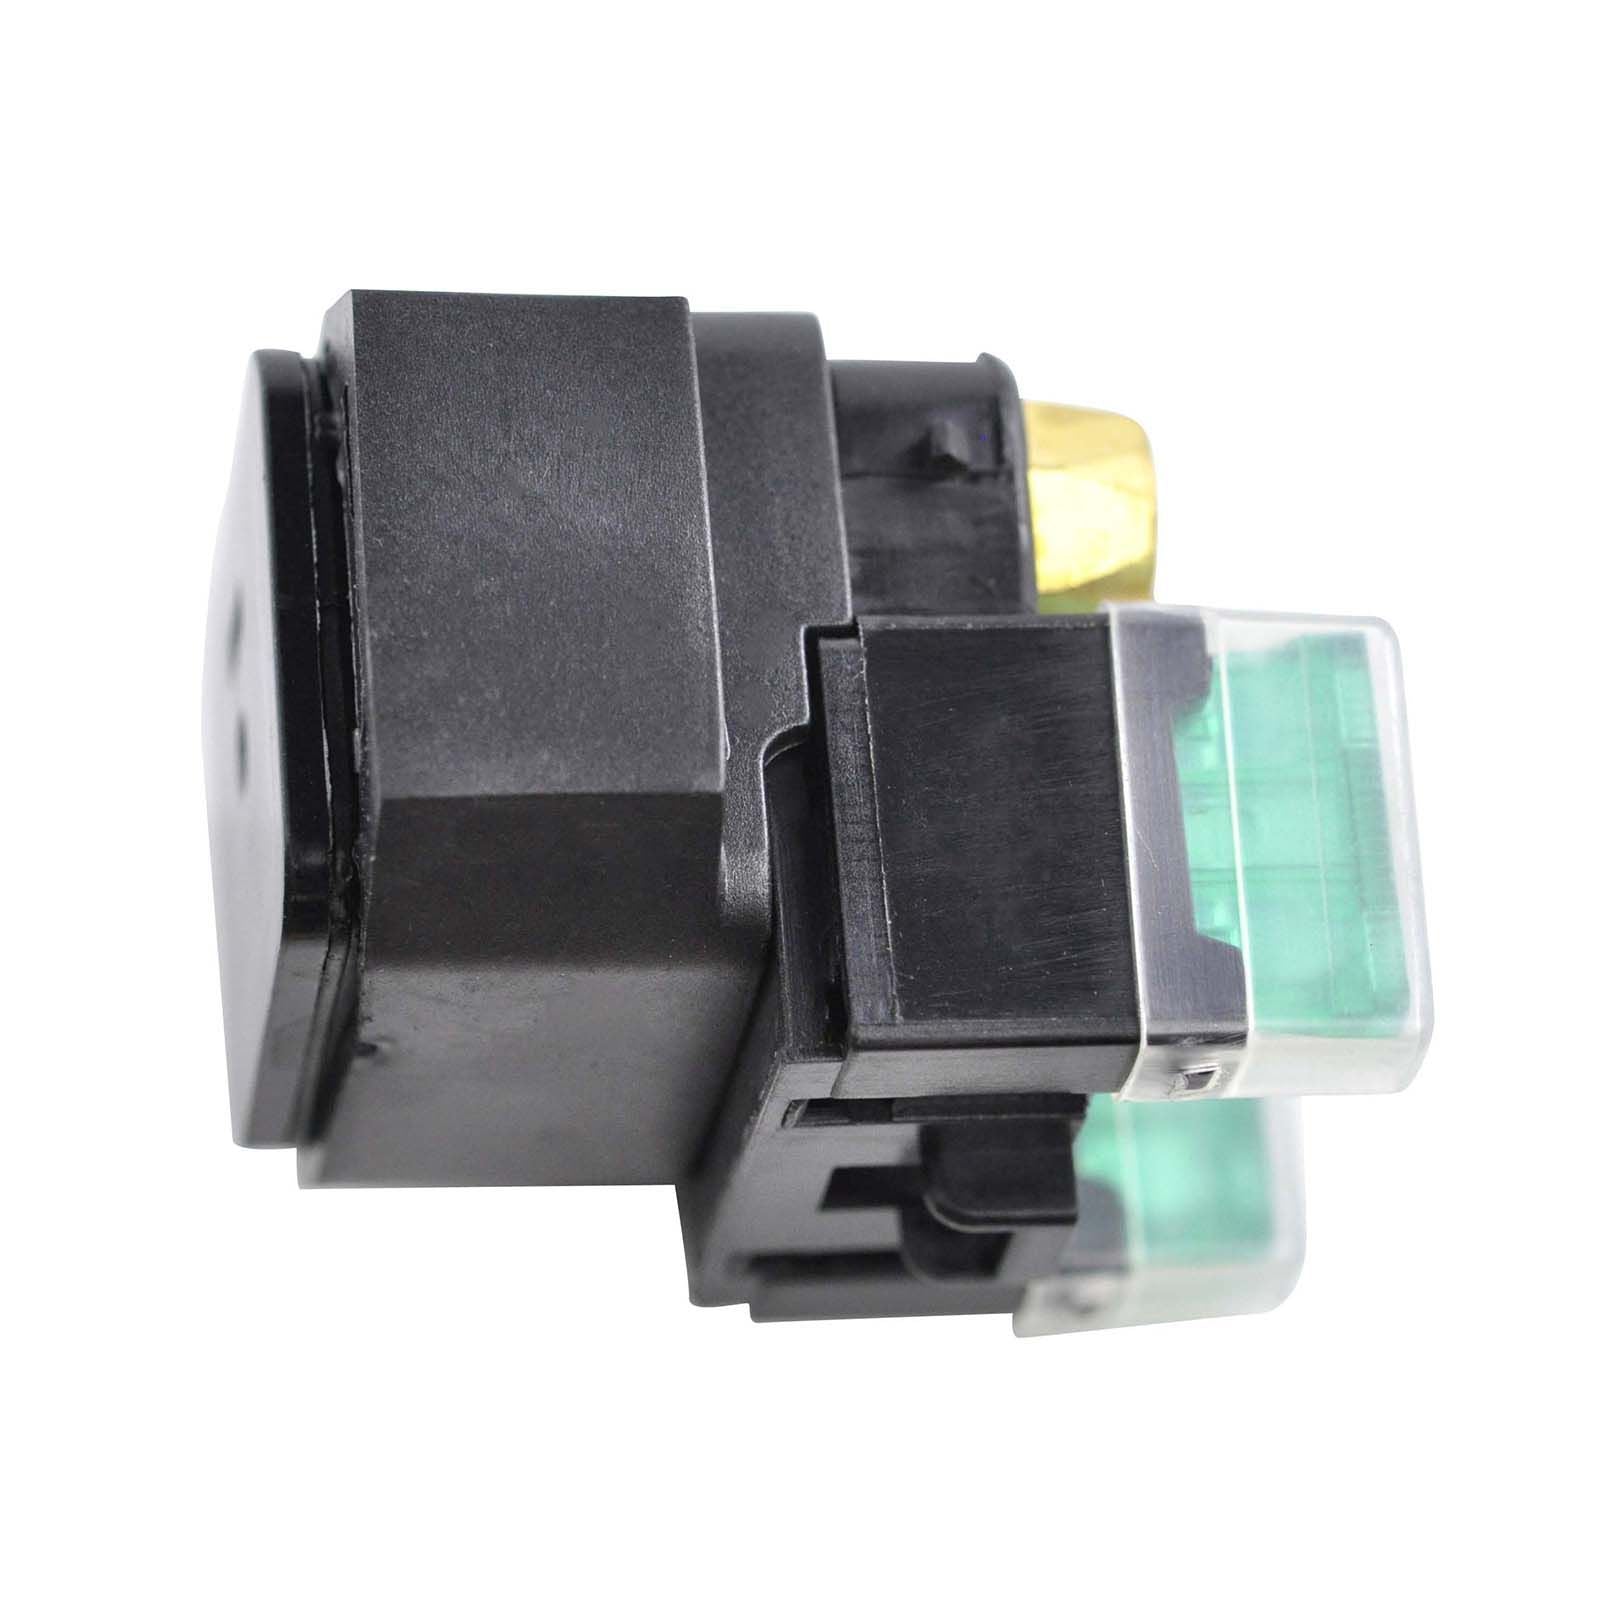 New RMSTATOR Starter Relay Solenoid - Assorted For Yamaha Models #RMS09007